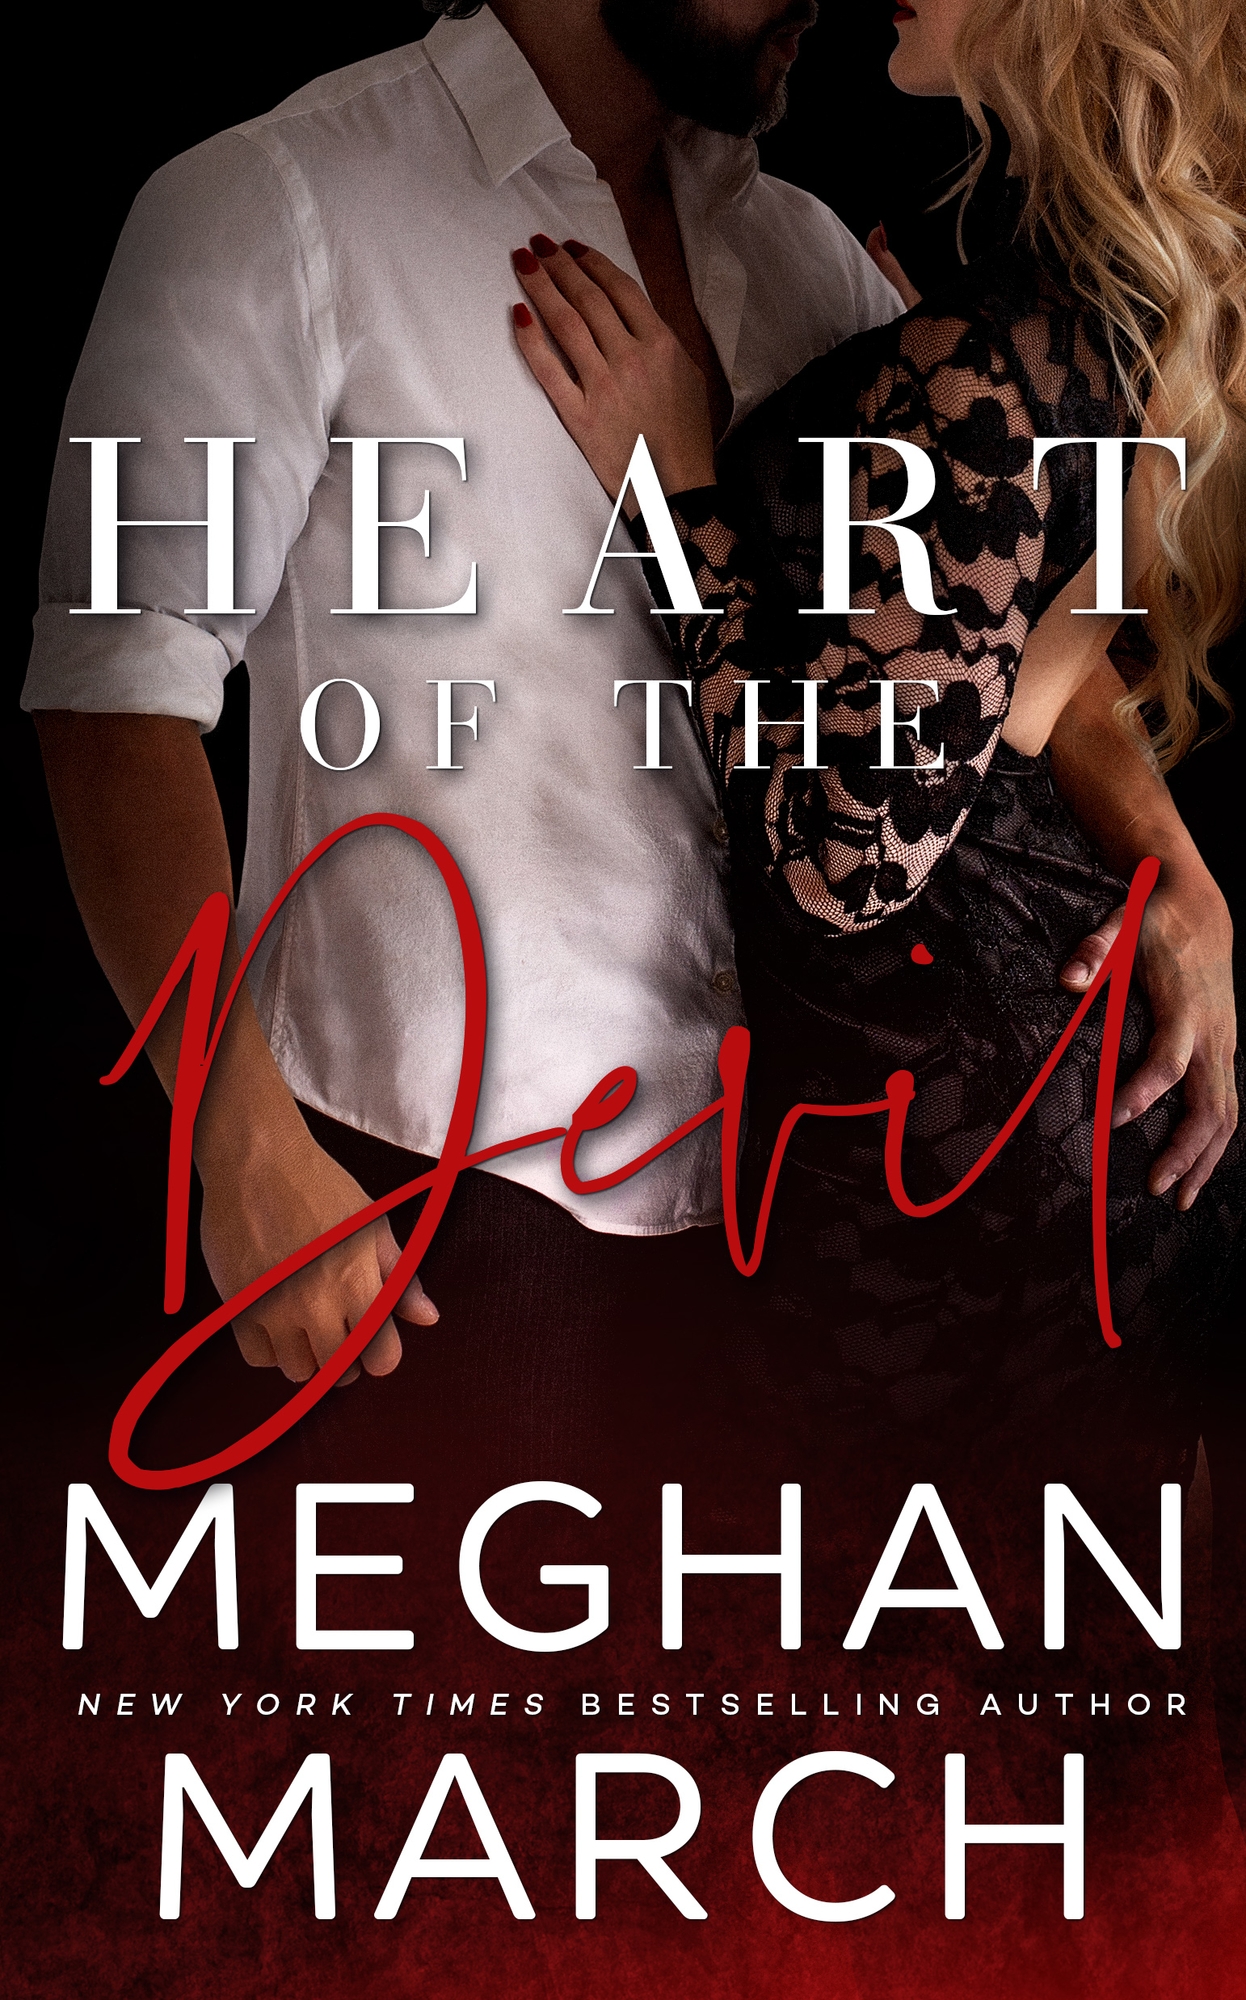 Heart of the Devil by Meghan March  [Blog Tour]